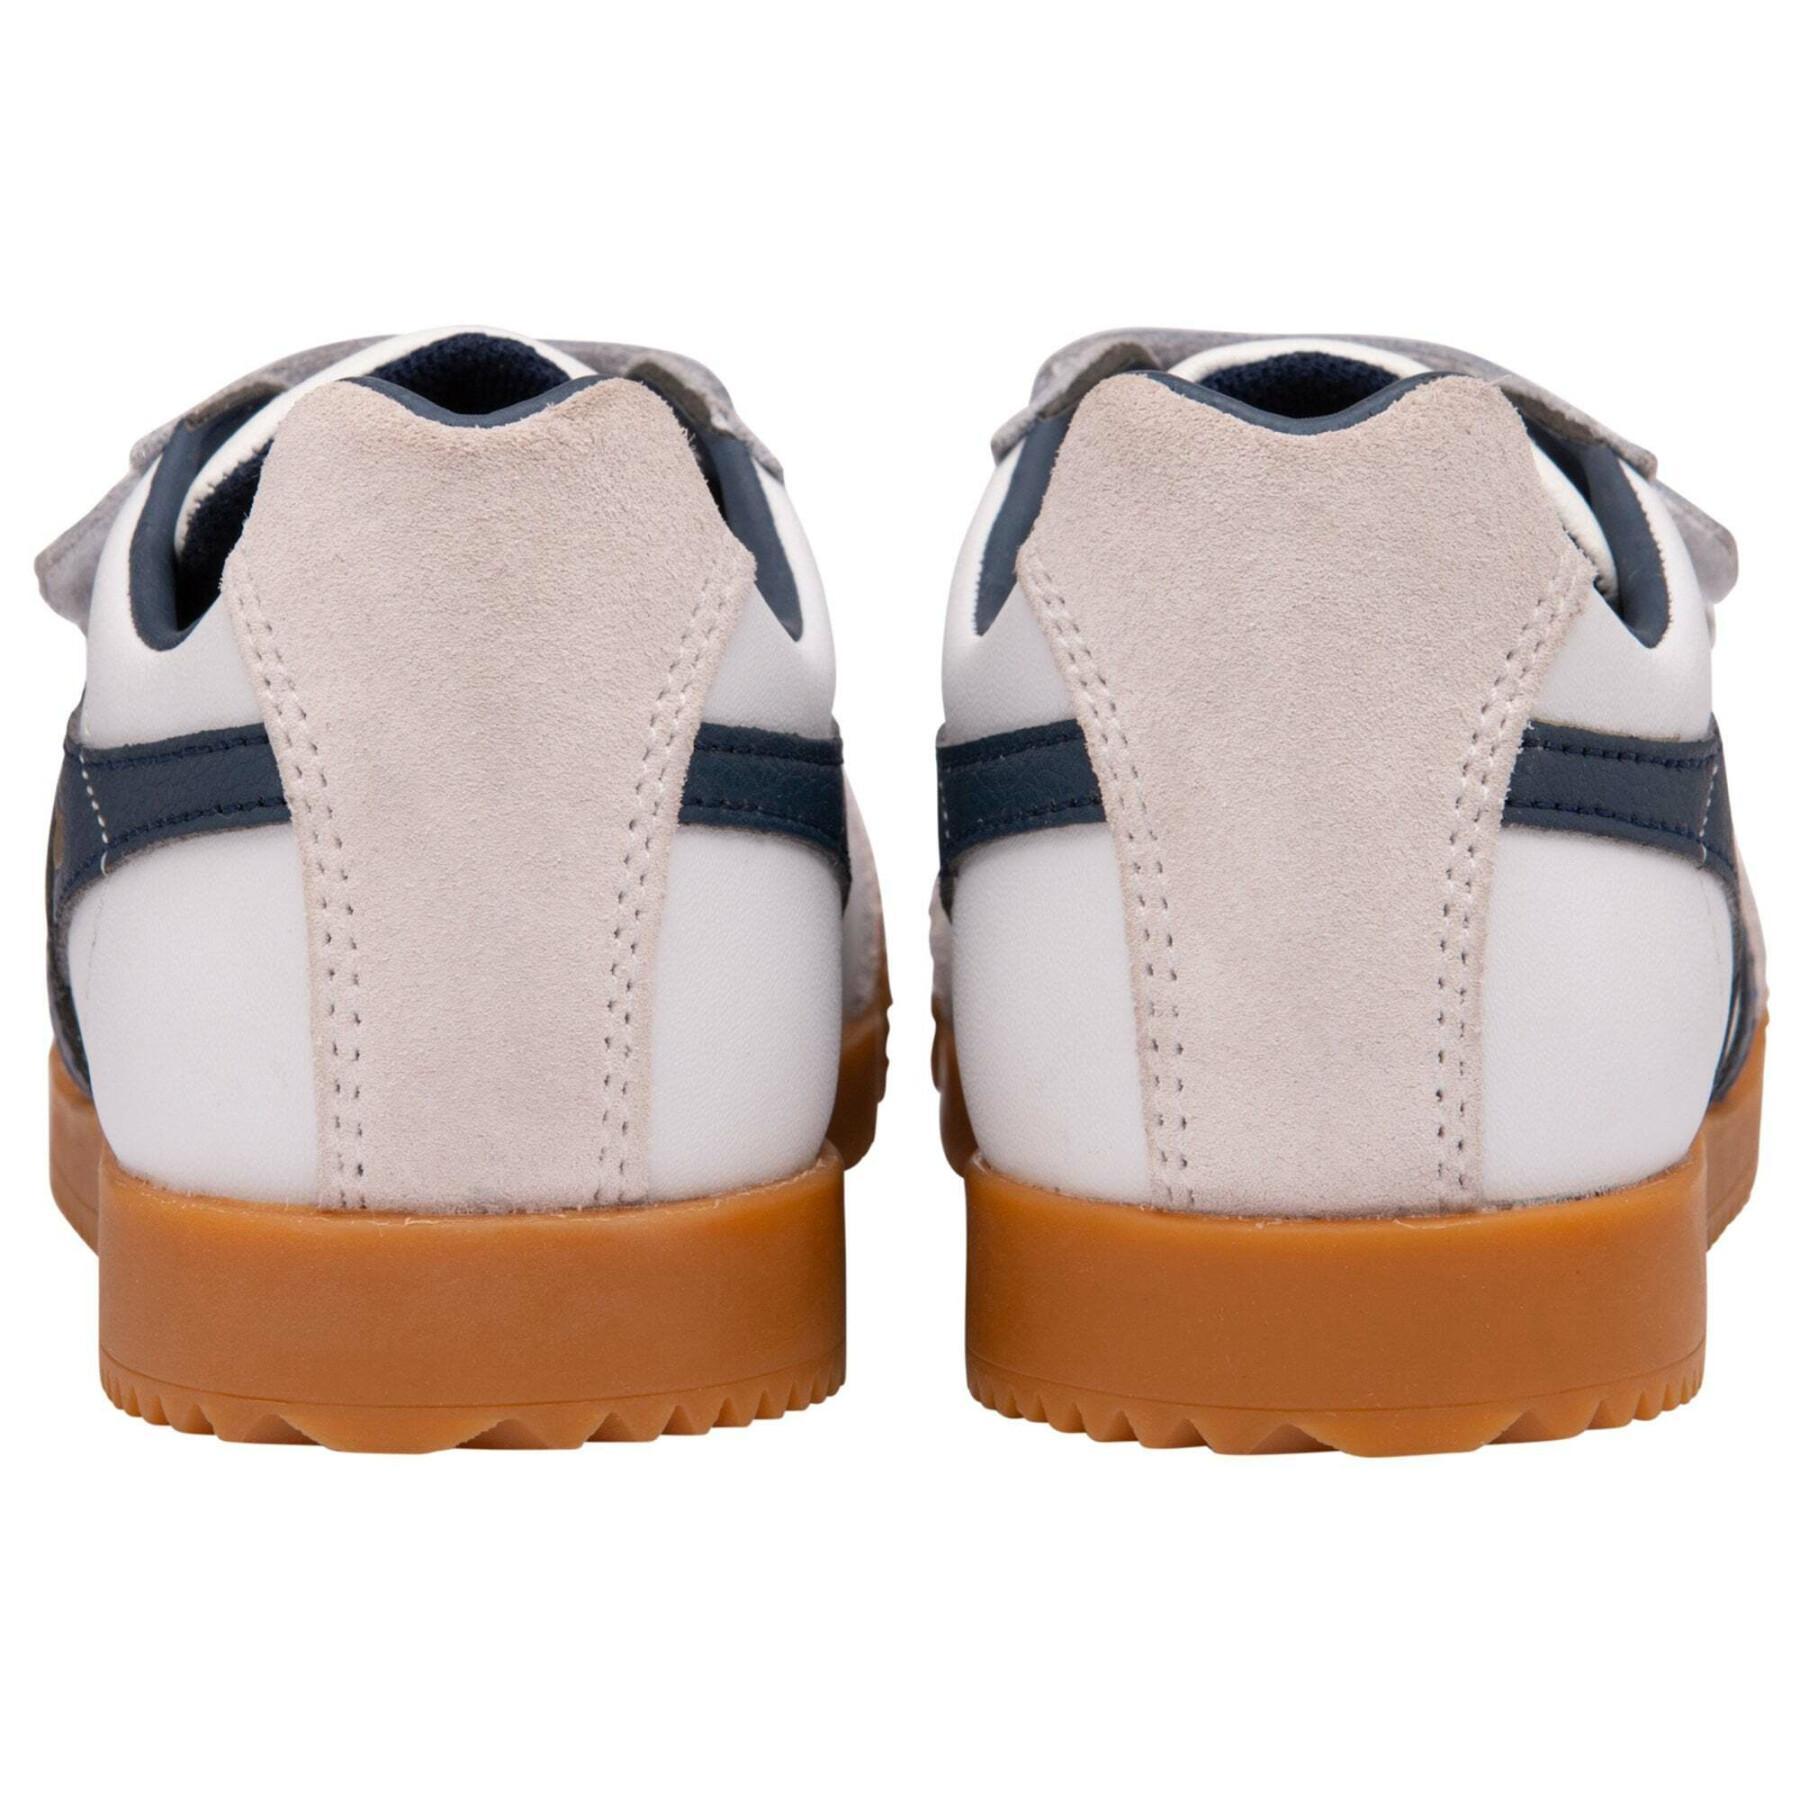 Child leather sneakers Gola Harrier Strap